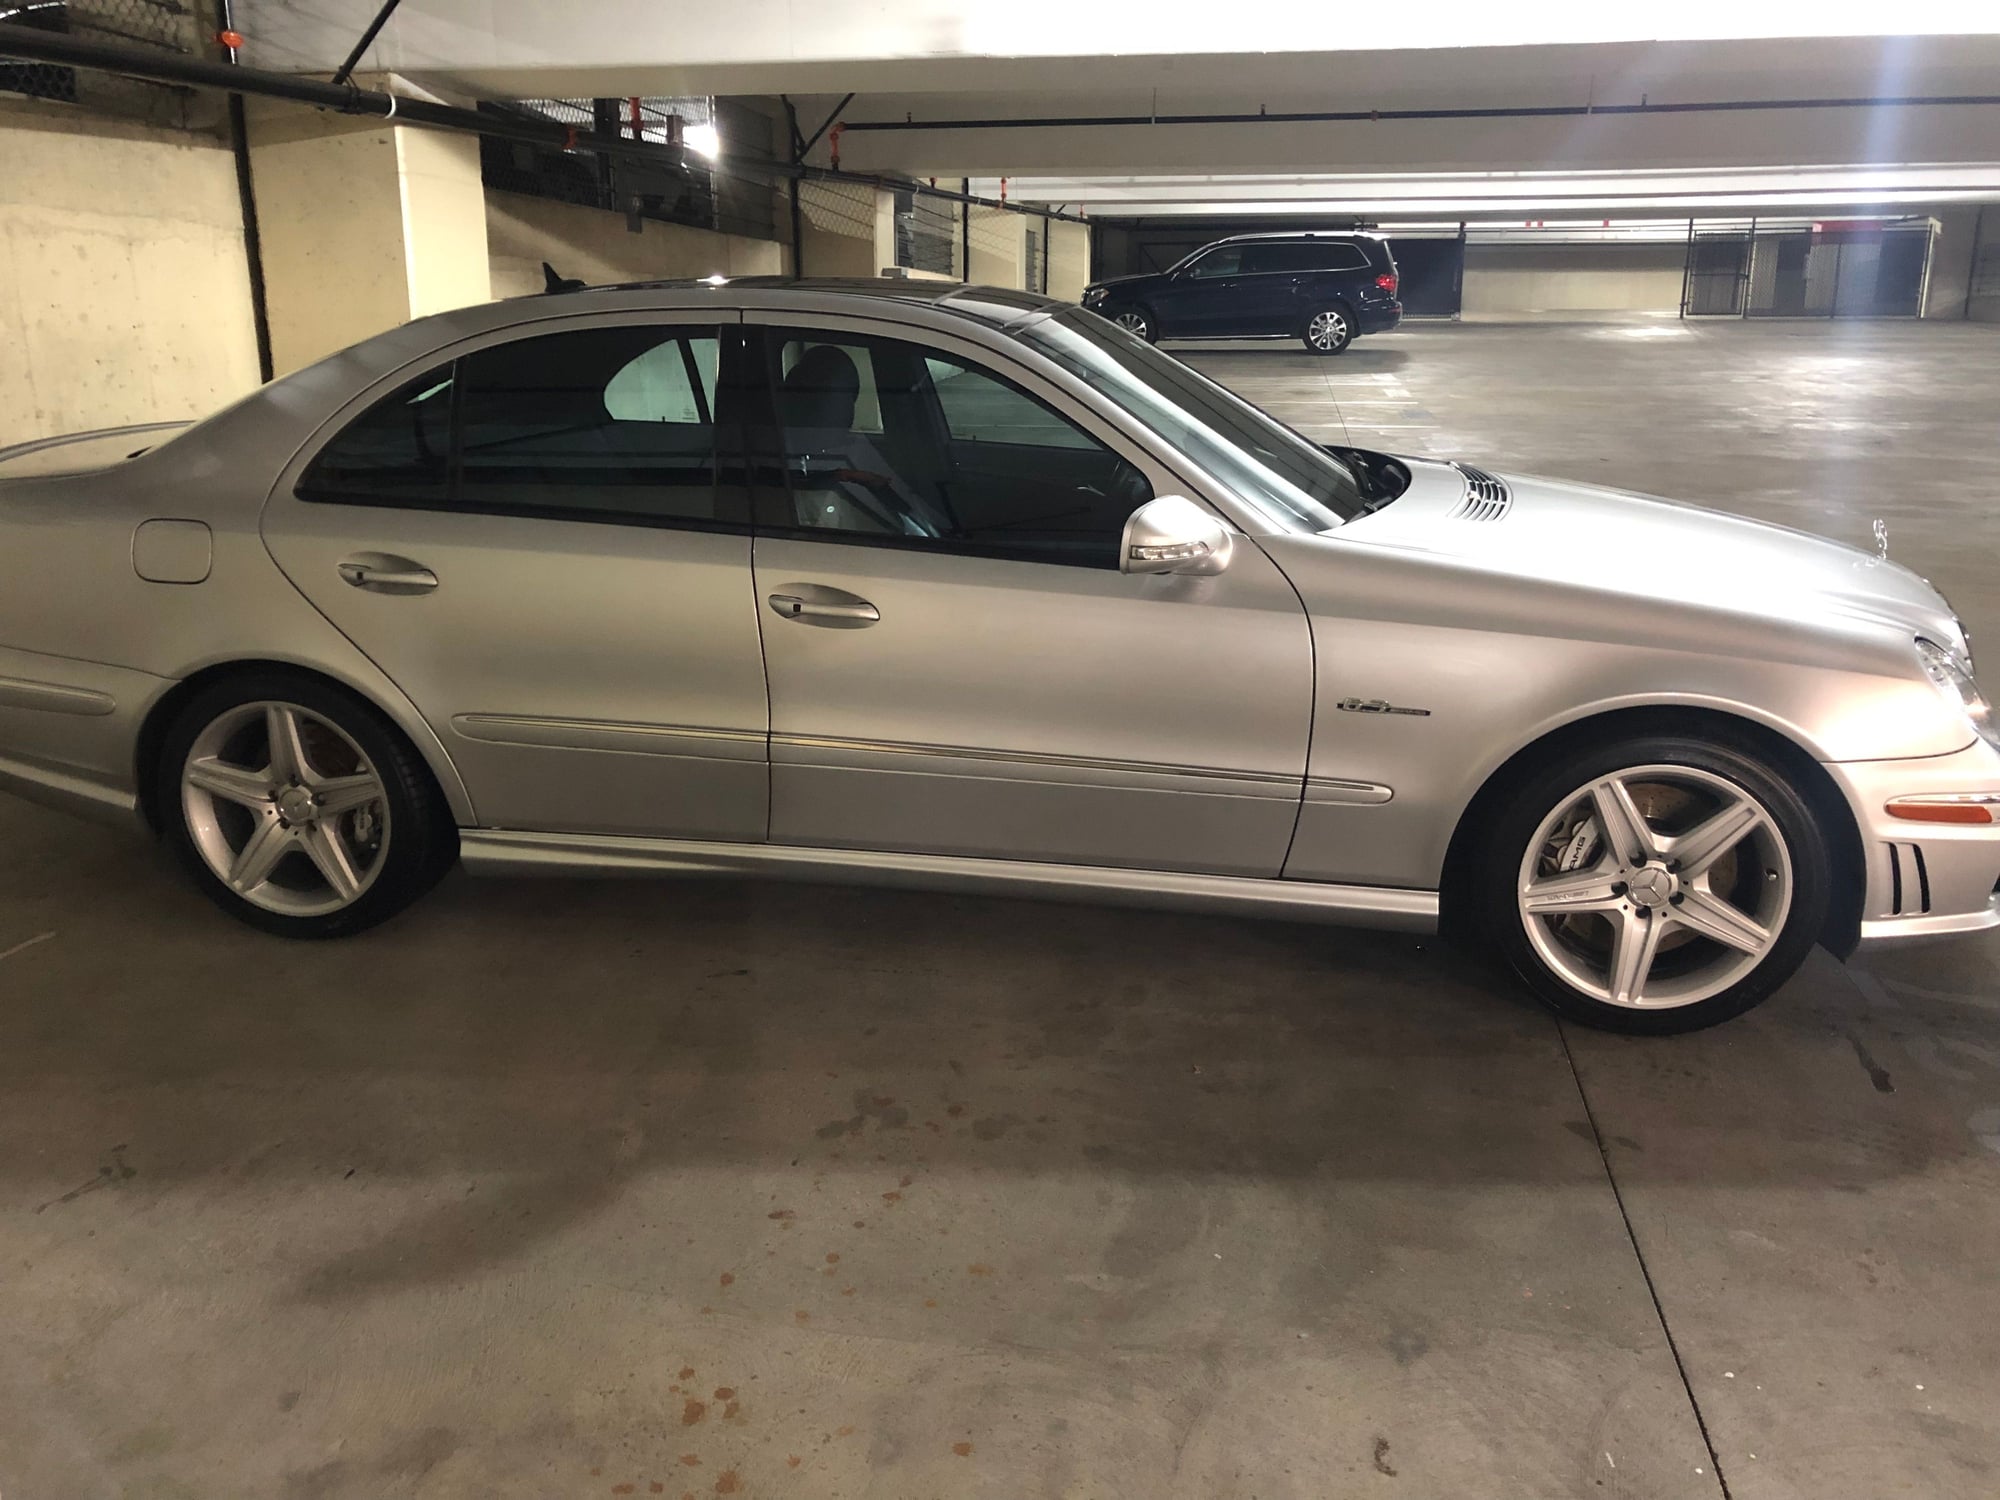 2007 Mercedes-Benz E63 AMG - Well maintained E63 AMG for sale, with warranty - Used - VIN Wdbuf77x27b042940 - 60,200 Miles - 8 cyl - 2WD - Automatic - Sedan - Silver - St. Louis, MO 63105, United States